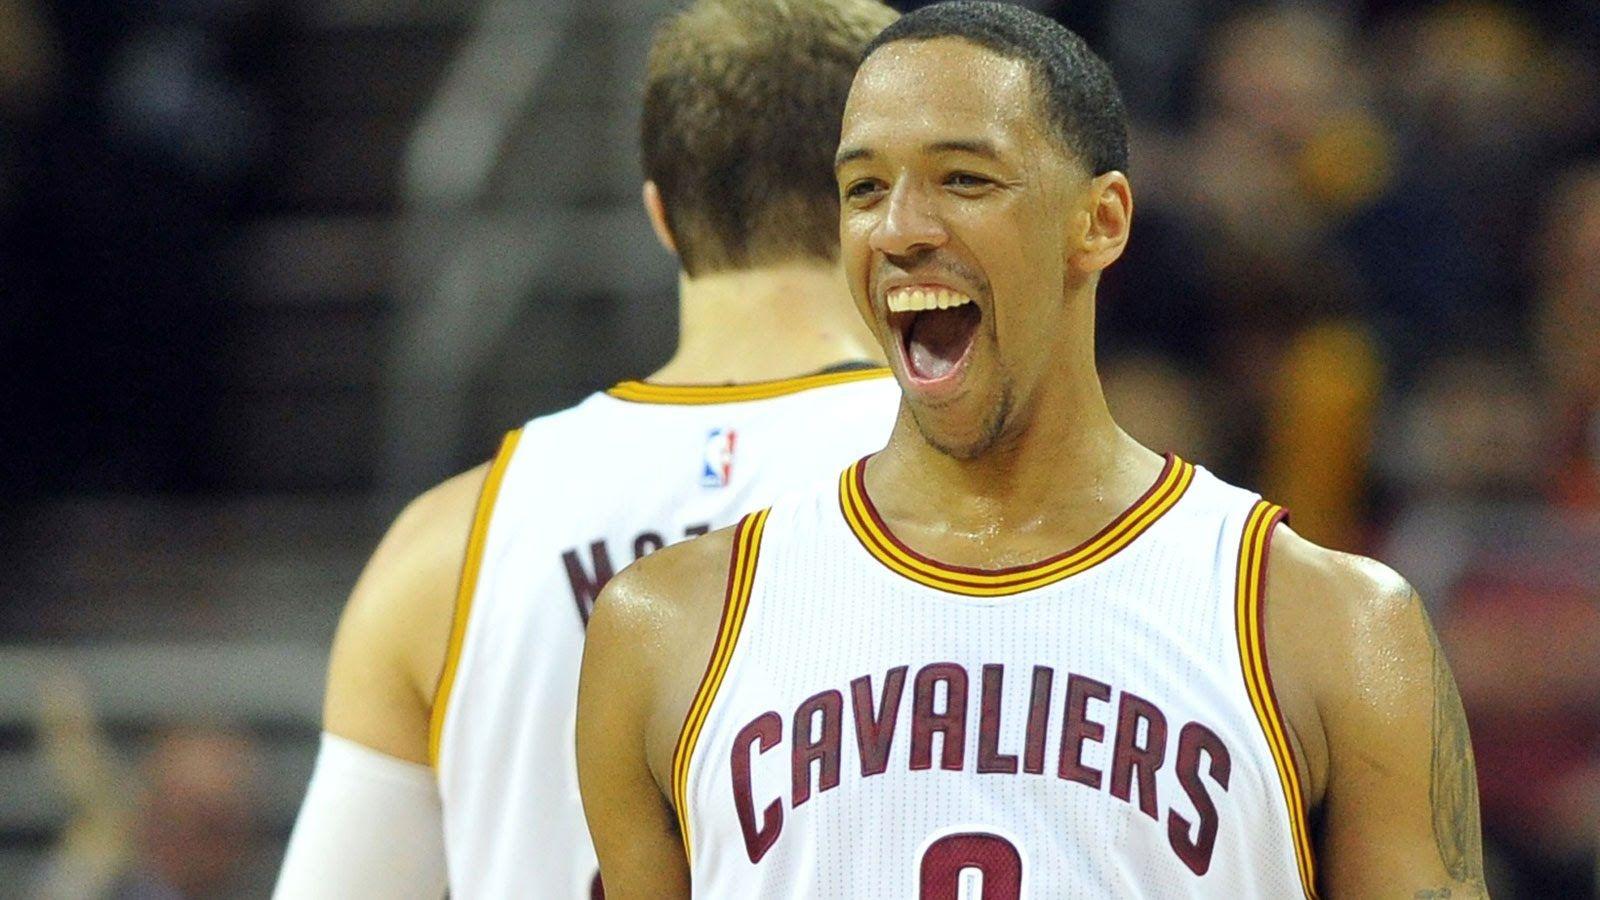 What does Channing Frye bring to the Cleveland Cavaliers?